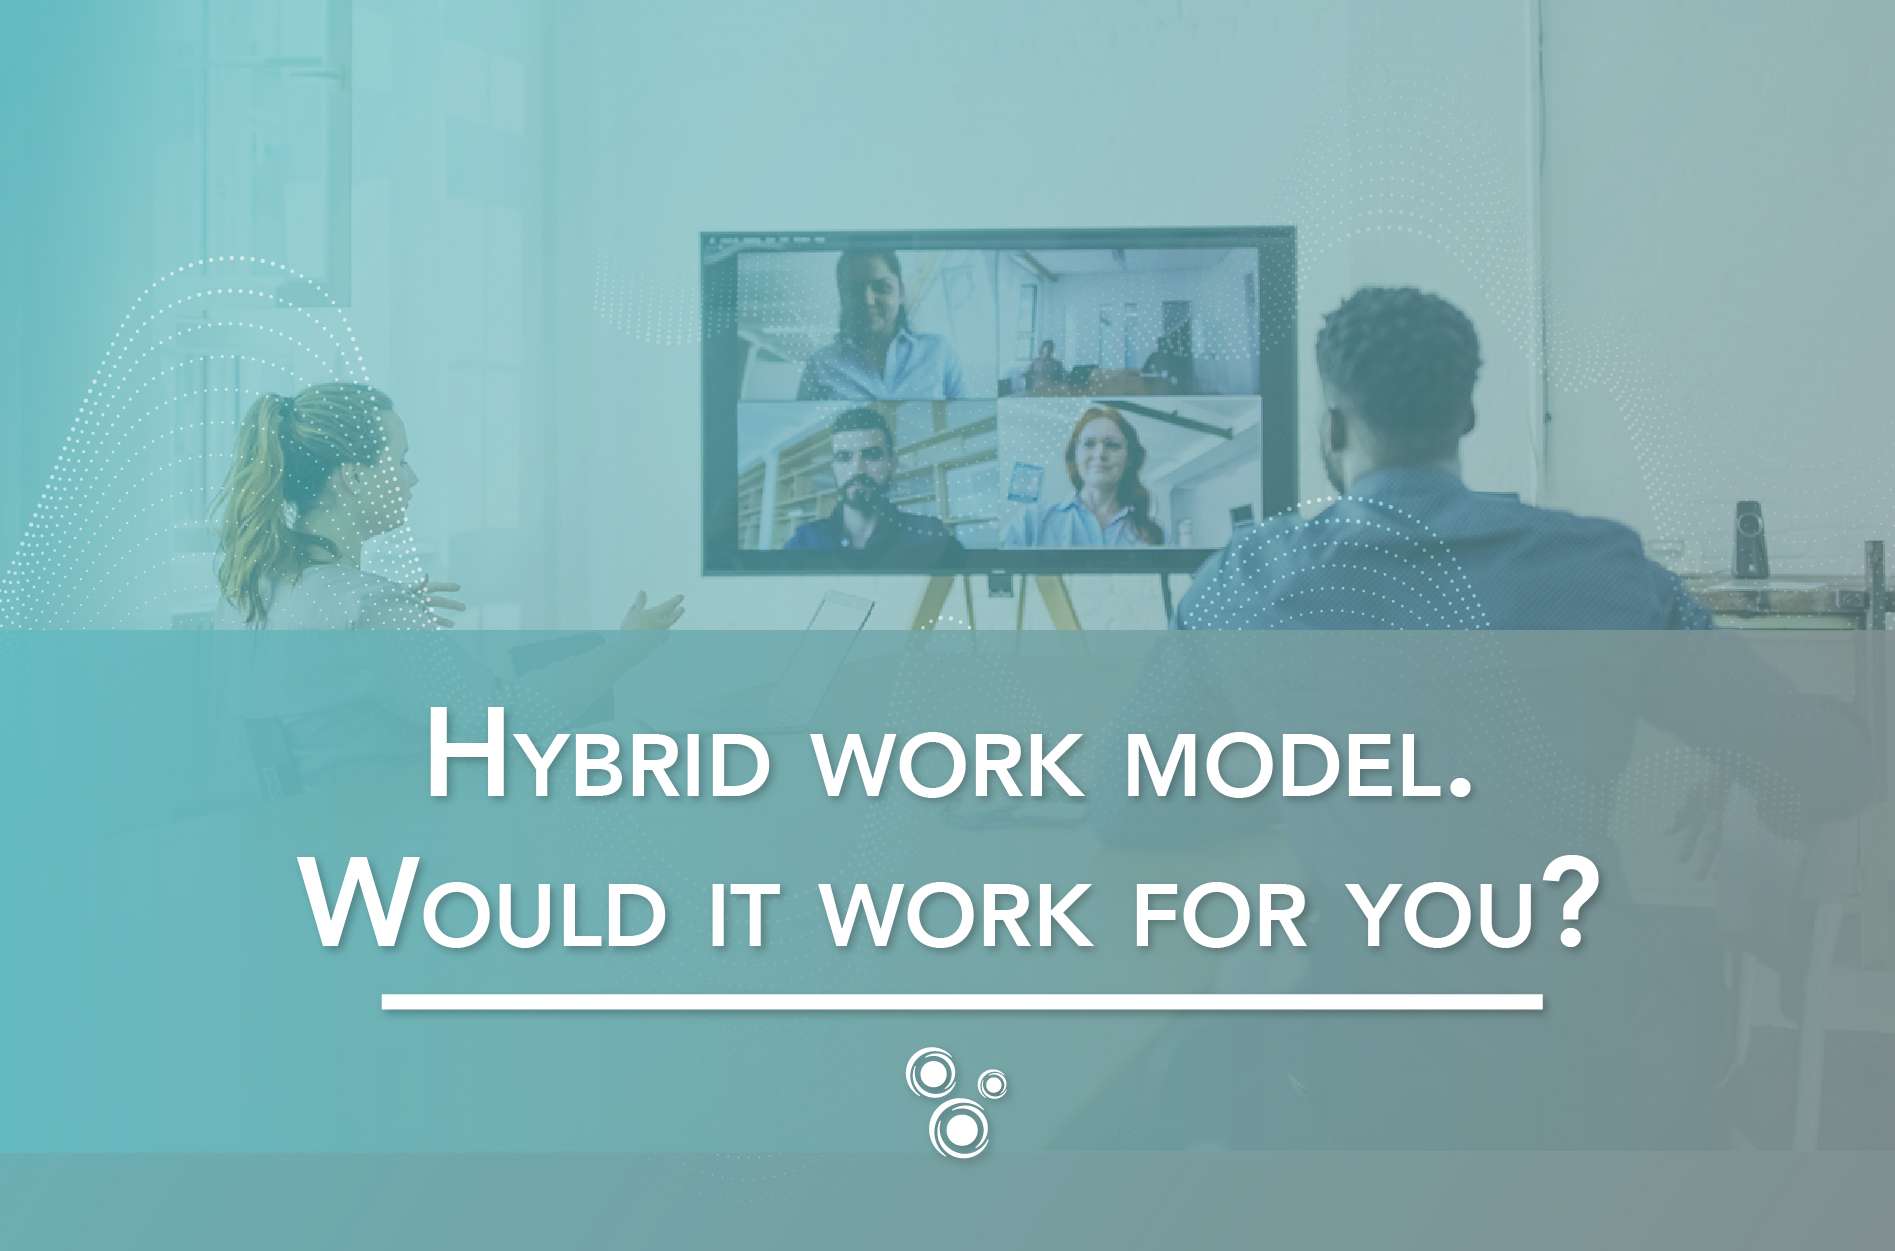 Hybrid work model. Would it work for you?